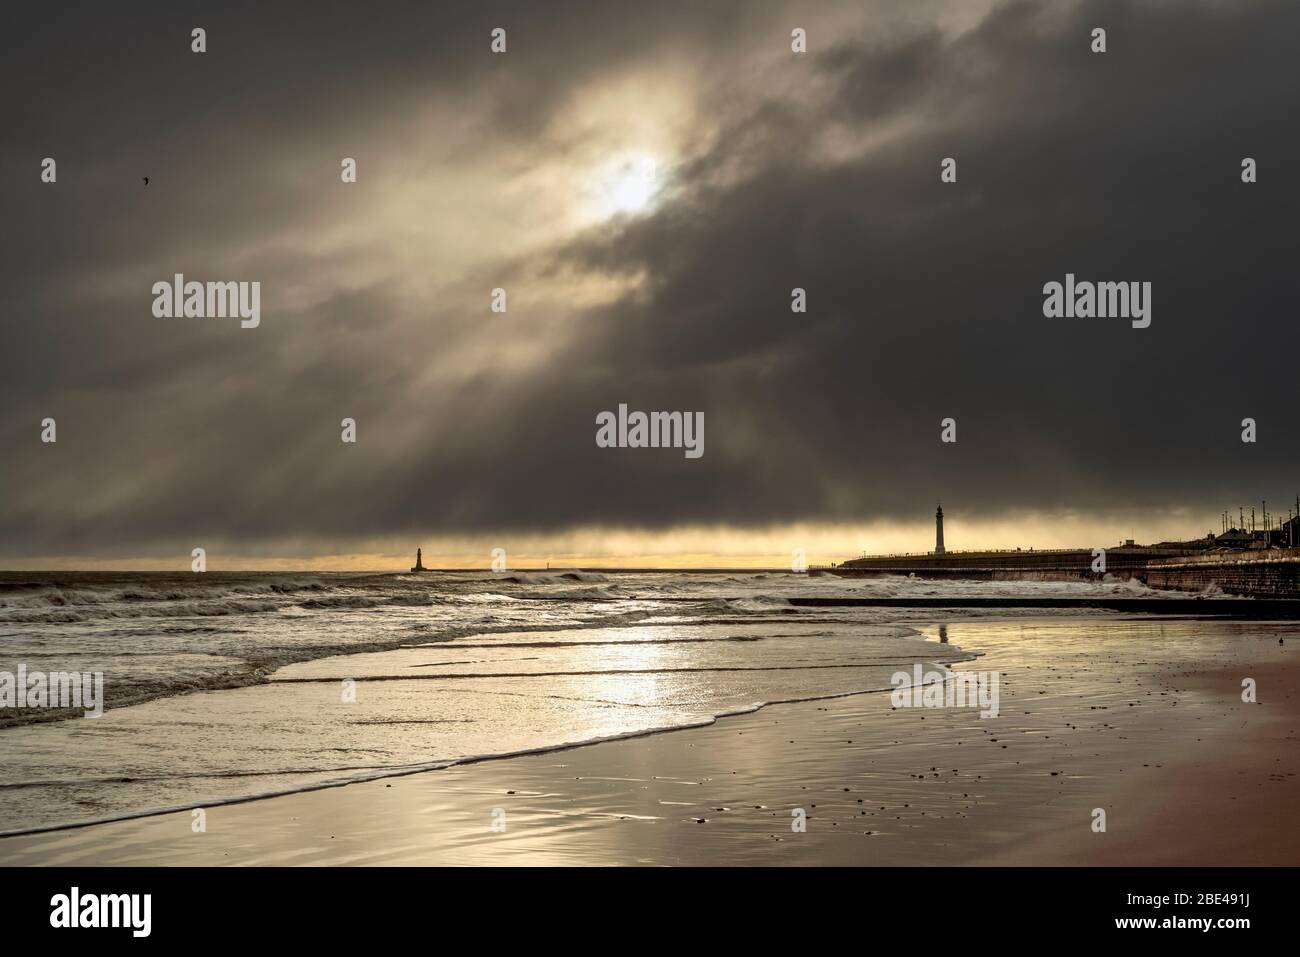 Silhouetted lighthouses along the coastline under dramatic cloudy sky; Whitburn Village, Tyne and Wear, England Stock Photo